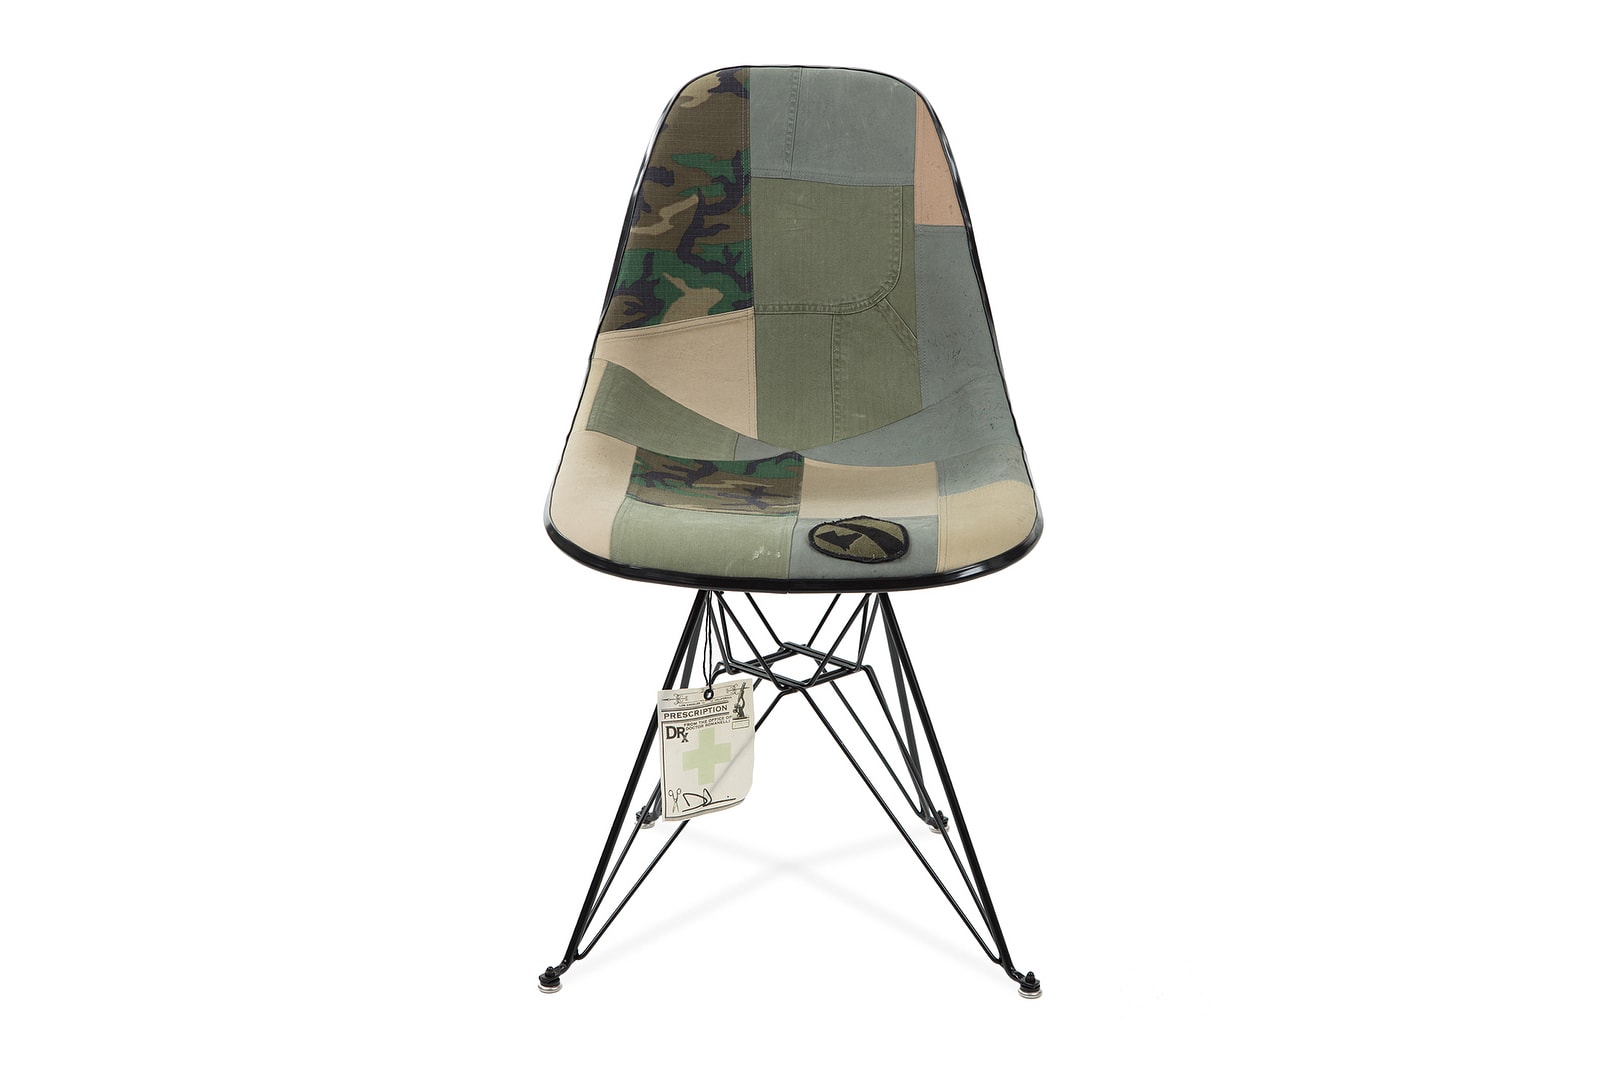 Modernica DRx Romanelli Military Case Study Side Shell Eiffel Chair Home Goods Furniture